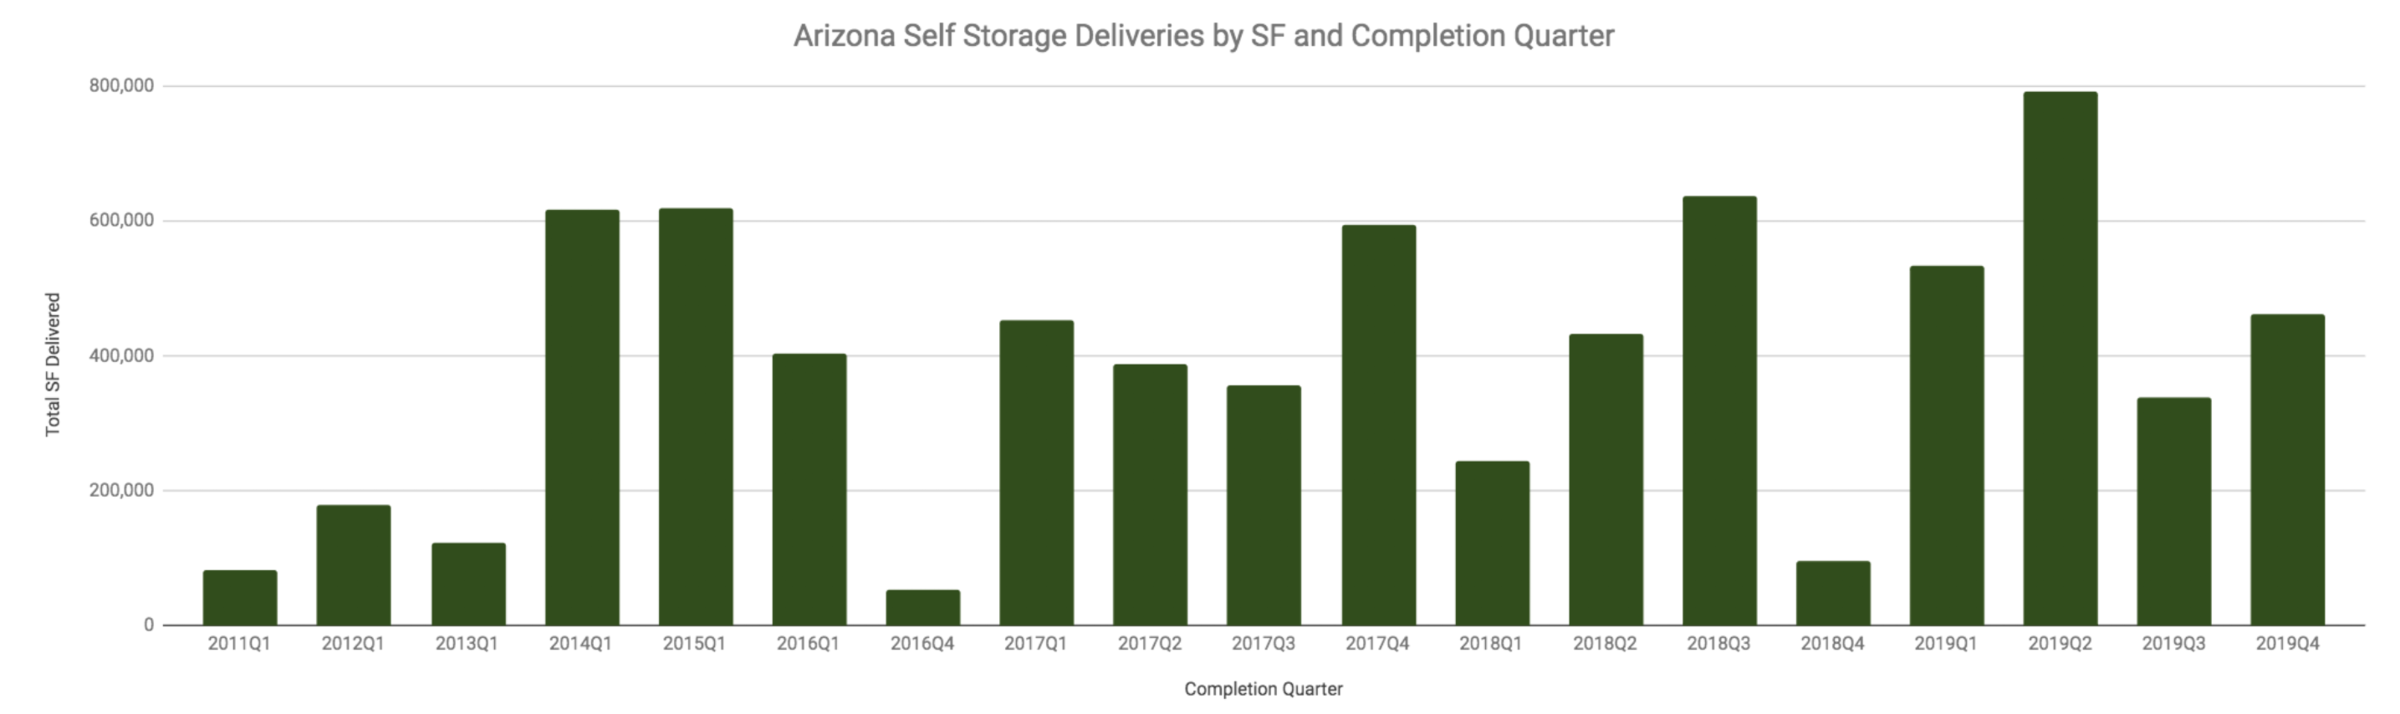 AZ Self Storage Deliveries by Square Foot by quarter through 2018